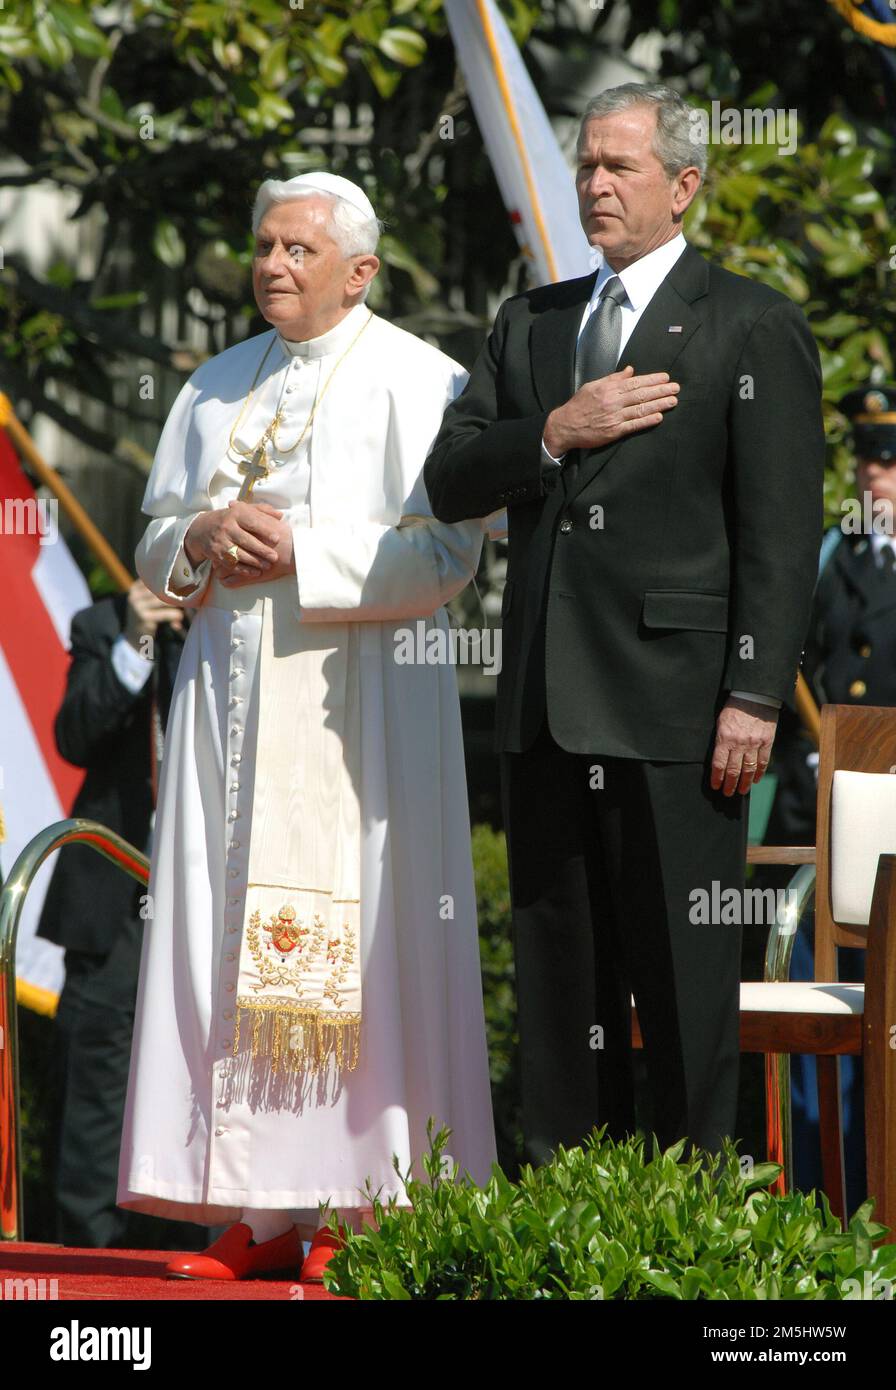 Washington, United States Of America. 16th Apr, 2008. Pope Benedict XVI, left, and United States President George W. Bush, right, stand at attention as the National Anthem is played as the Pontiff arrives at the White House in Washington, DC on Wednesday, April 16, 2008. Credit: Ron Sachs/CNP/Sipa USA.(RESTRICTION: NO New York or New Jersey Newspapers or newspapers within a 75 mile radius of New York City) Credit: Sipa USA/Alamy Live News Stock Photo